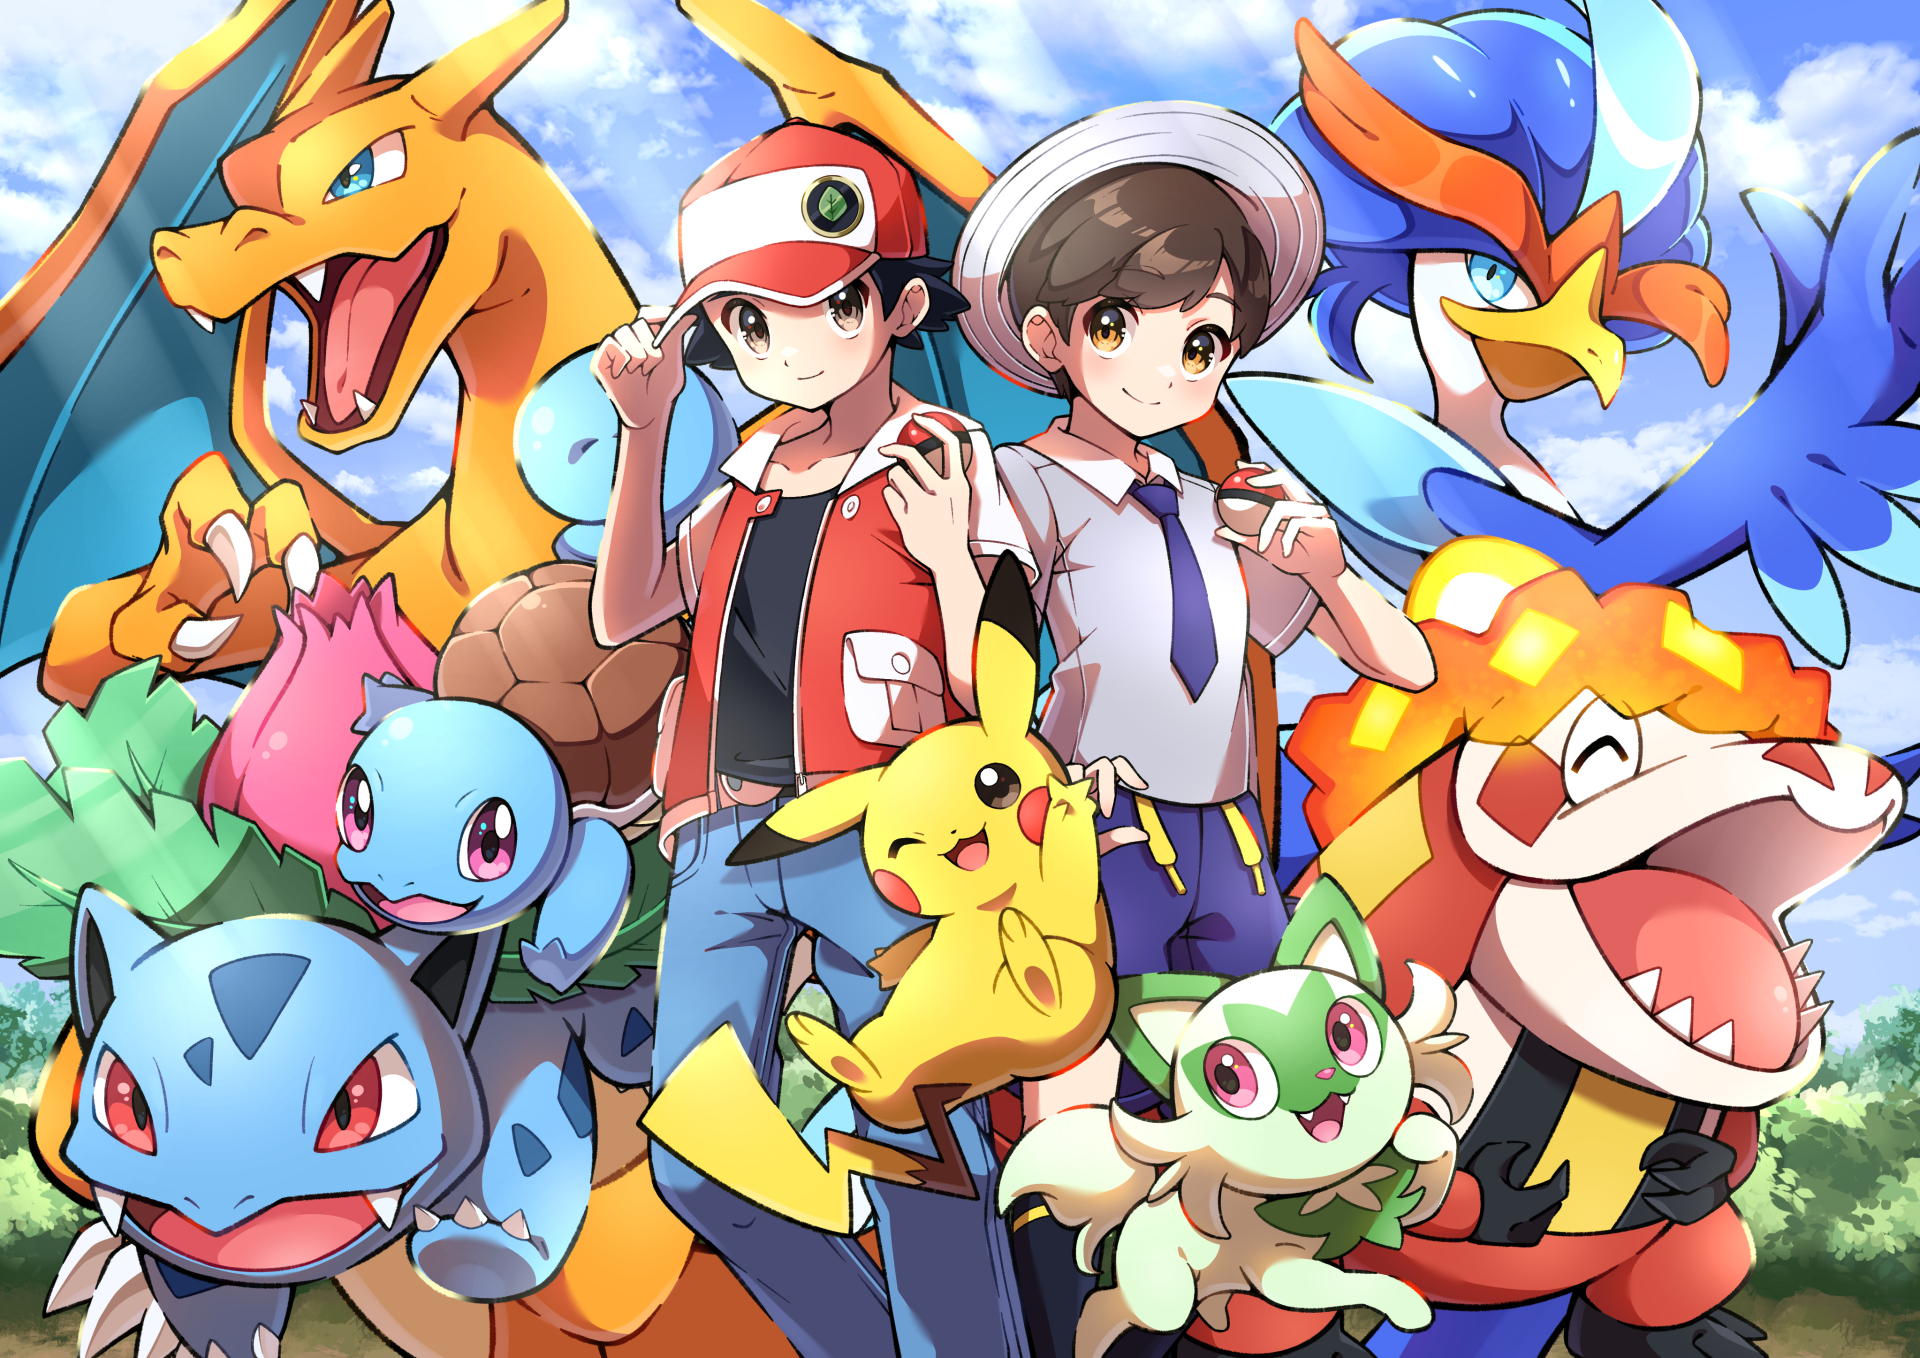 Red (Pokémon) - Desktop Wallpapers, Phone Wallpaper, PFP, Gifs, and More!